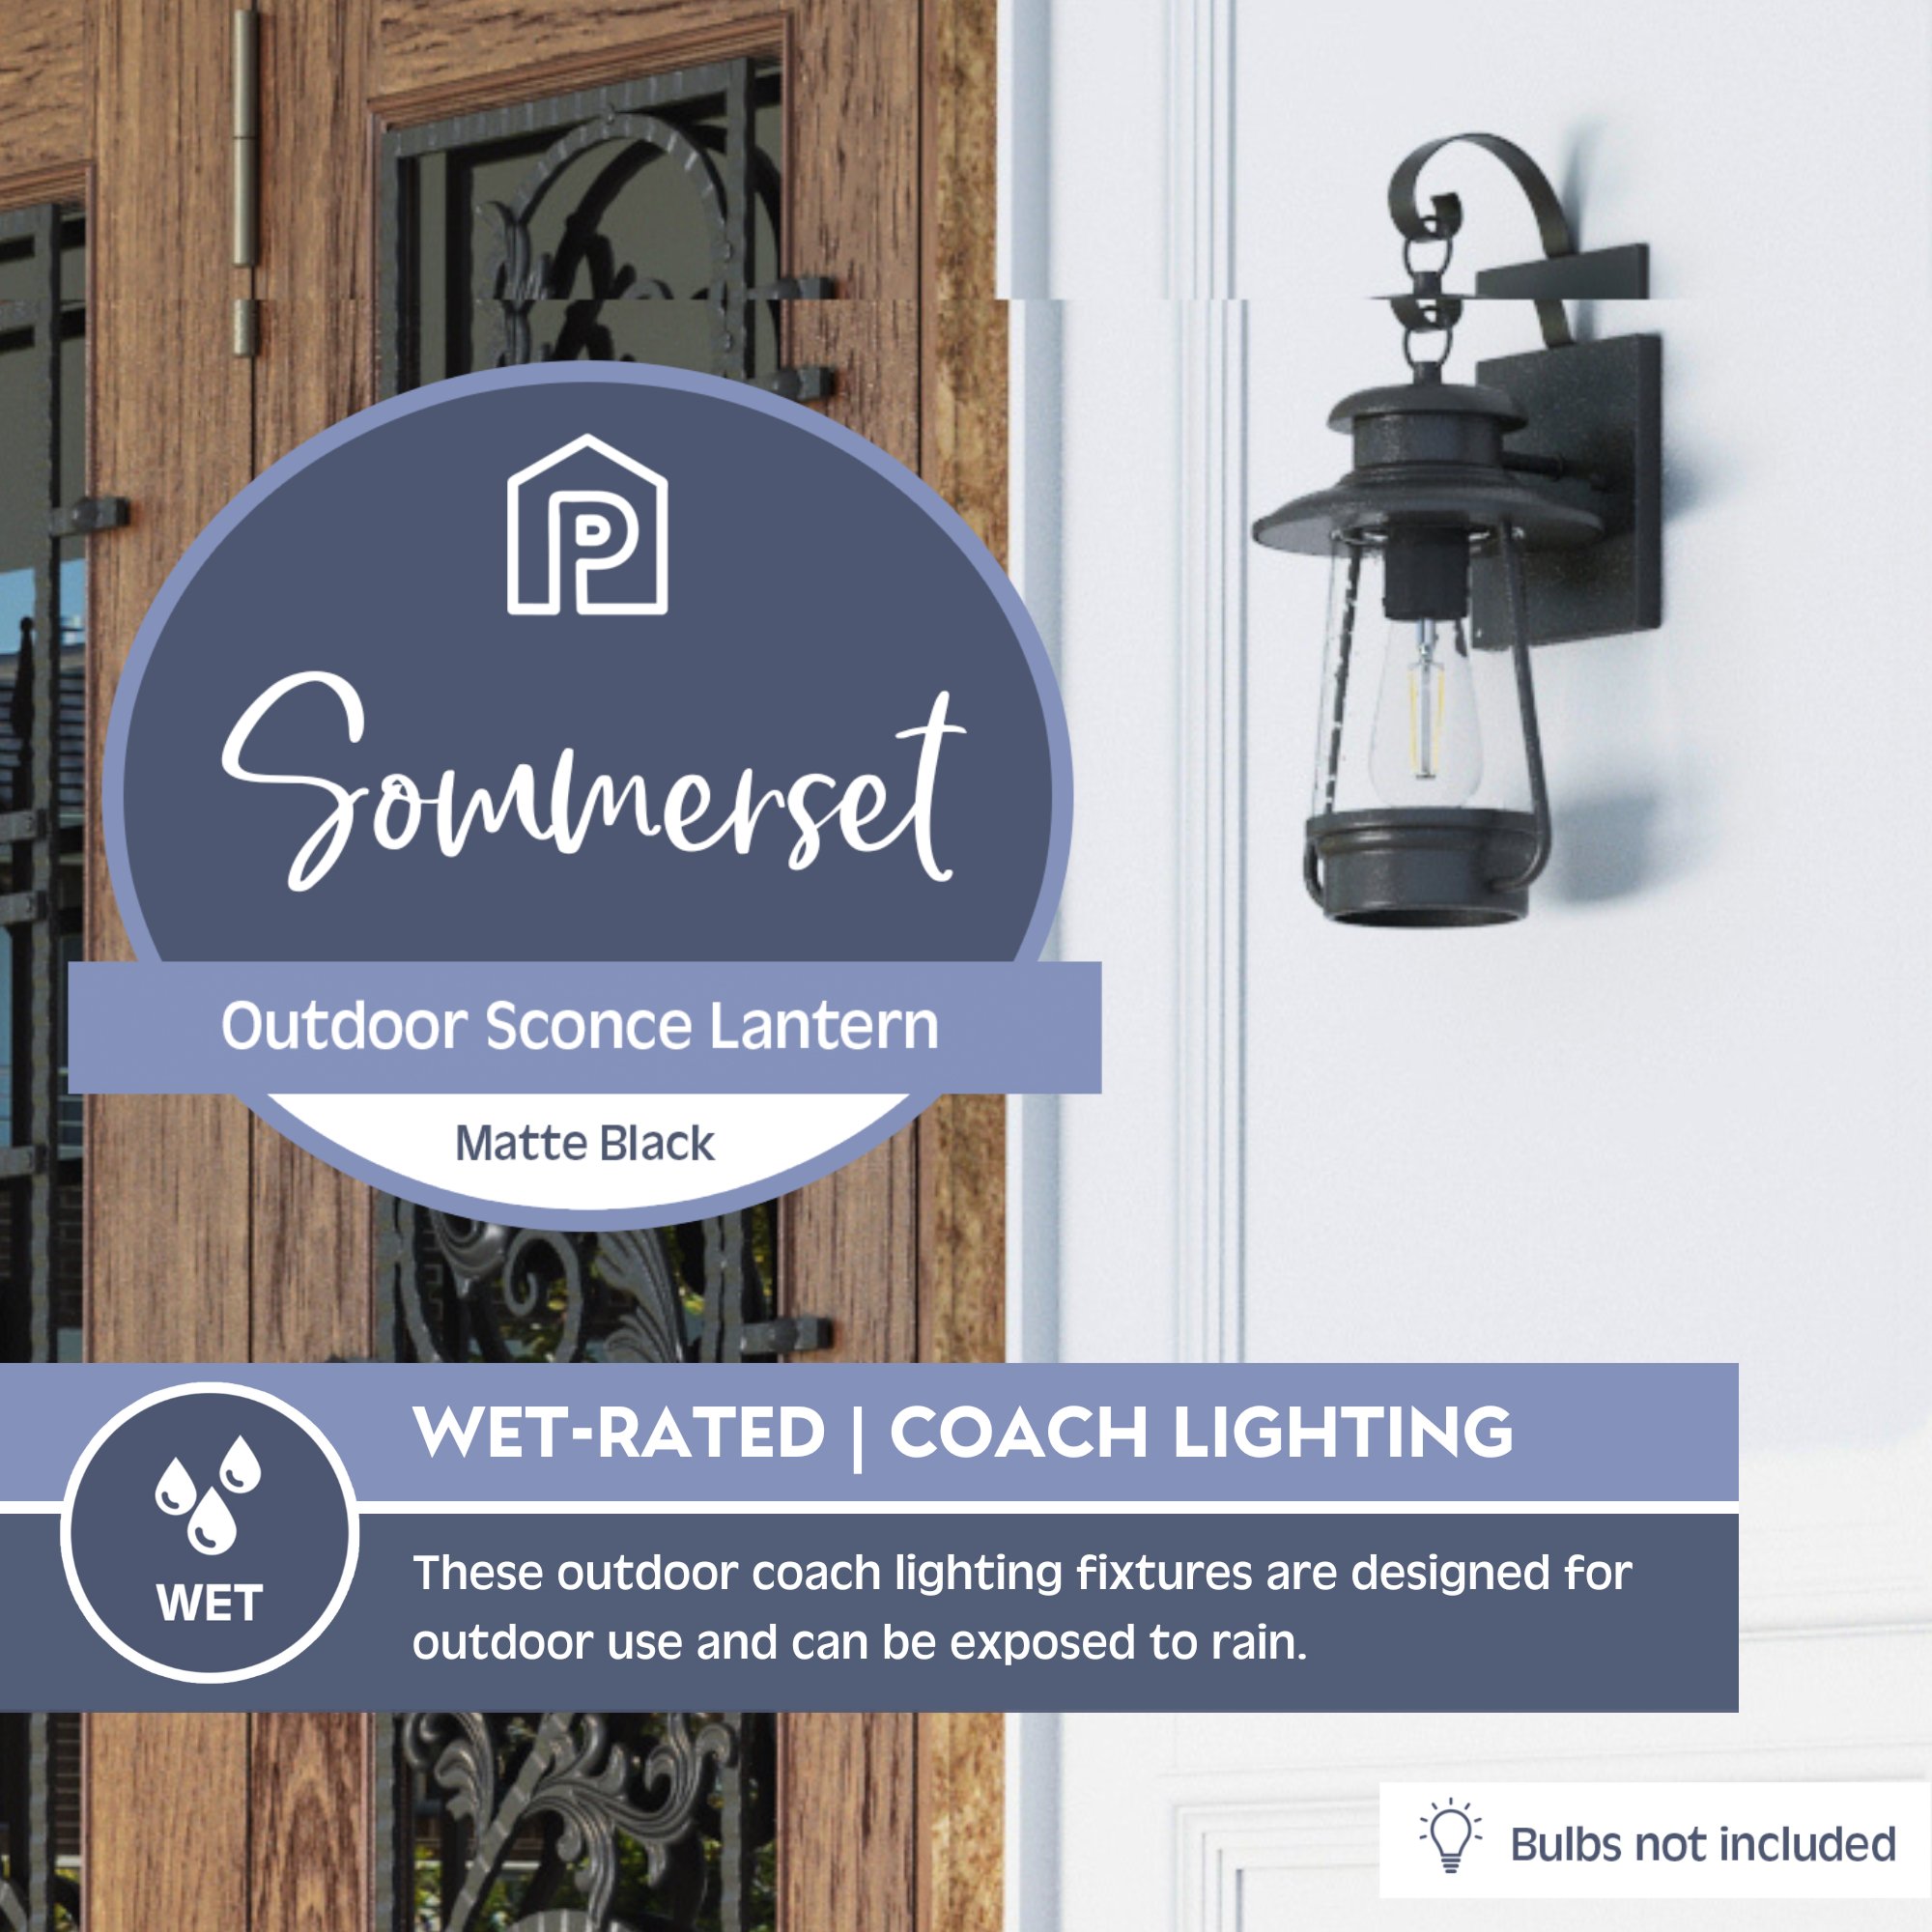 Sommerset, Wet-Rated Coach Light, Matte Black by Prominence Home